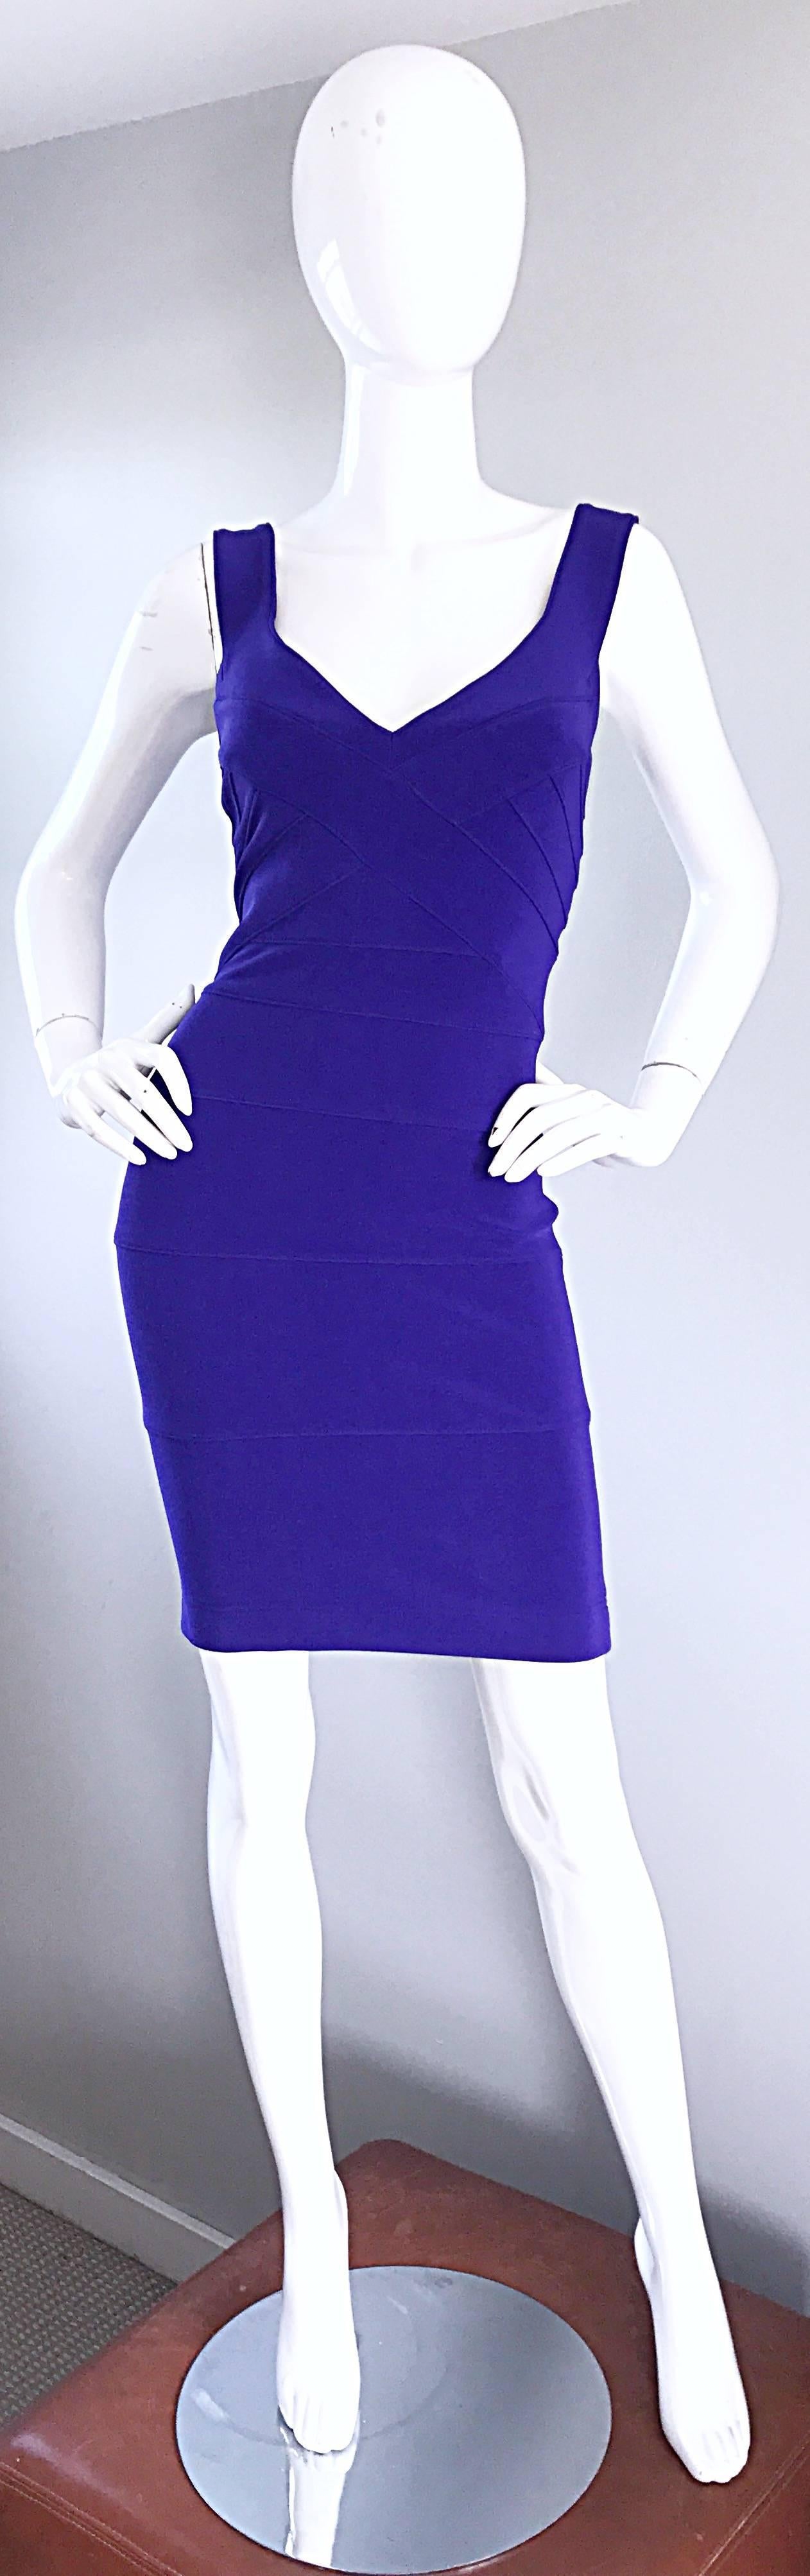 Sexy brand new (with original I MAGNIN store tags attached) TADASHI SHOJI purple bodcon mini bandage dress! Figure hugging fit, with plenty of stretch. Hidden zipper up the back with hook-and-eye closure. Heavy attention to detail went into the